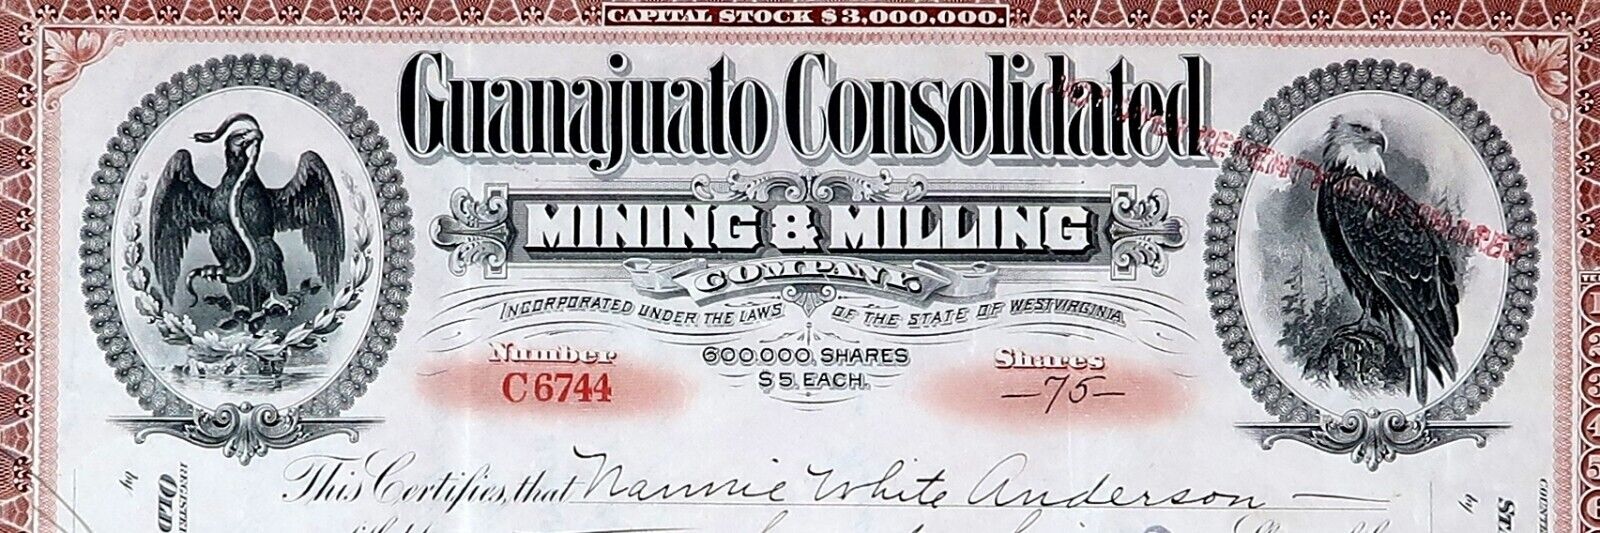 1926 Antique Guanajuato Consolidated Mining & Milling Company 75 Shares Stock